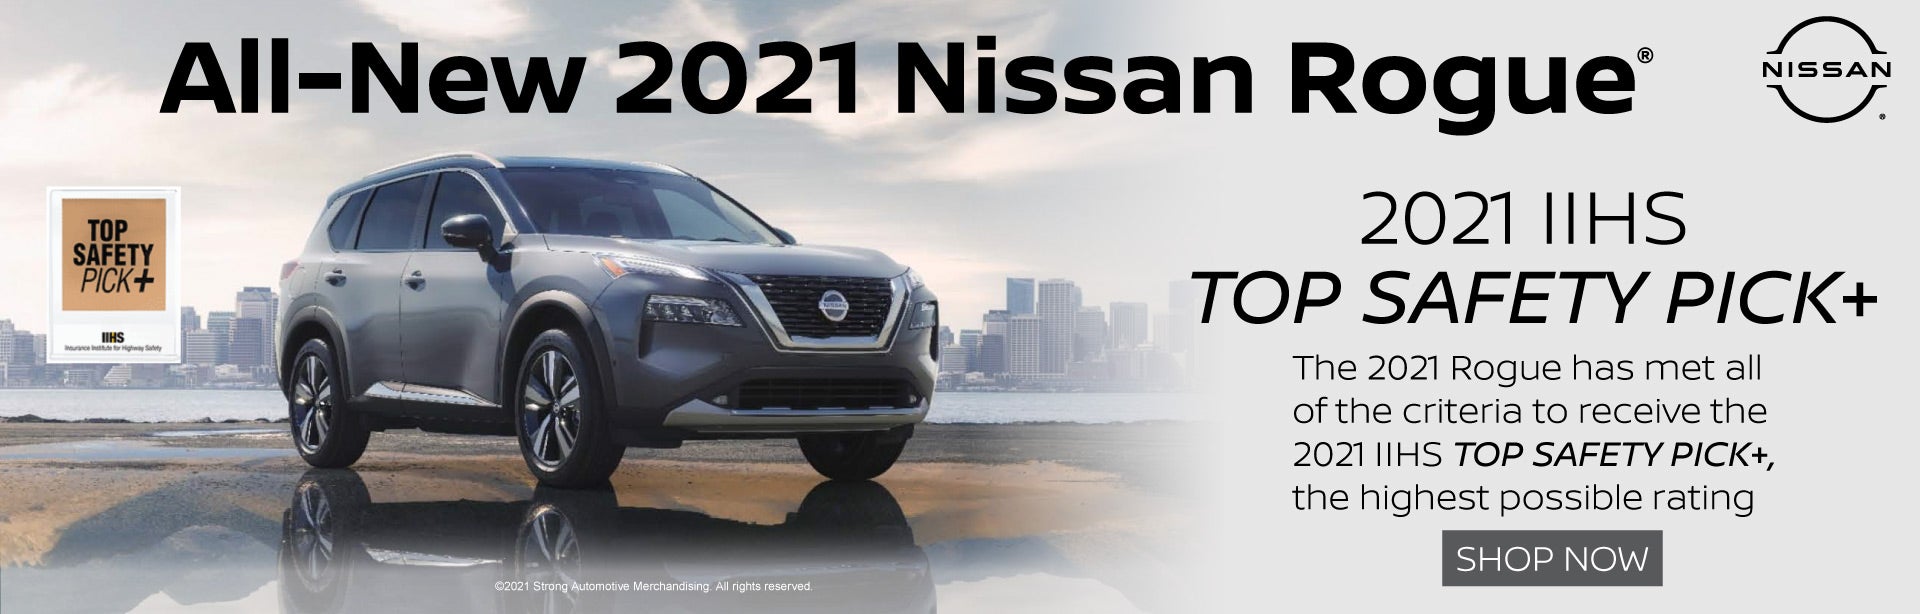 All-New 2021 Nissan Rogue - 2021 IIHS Top Safety Pick